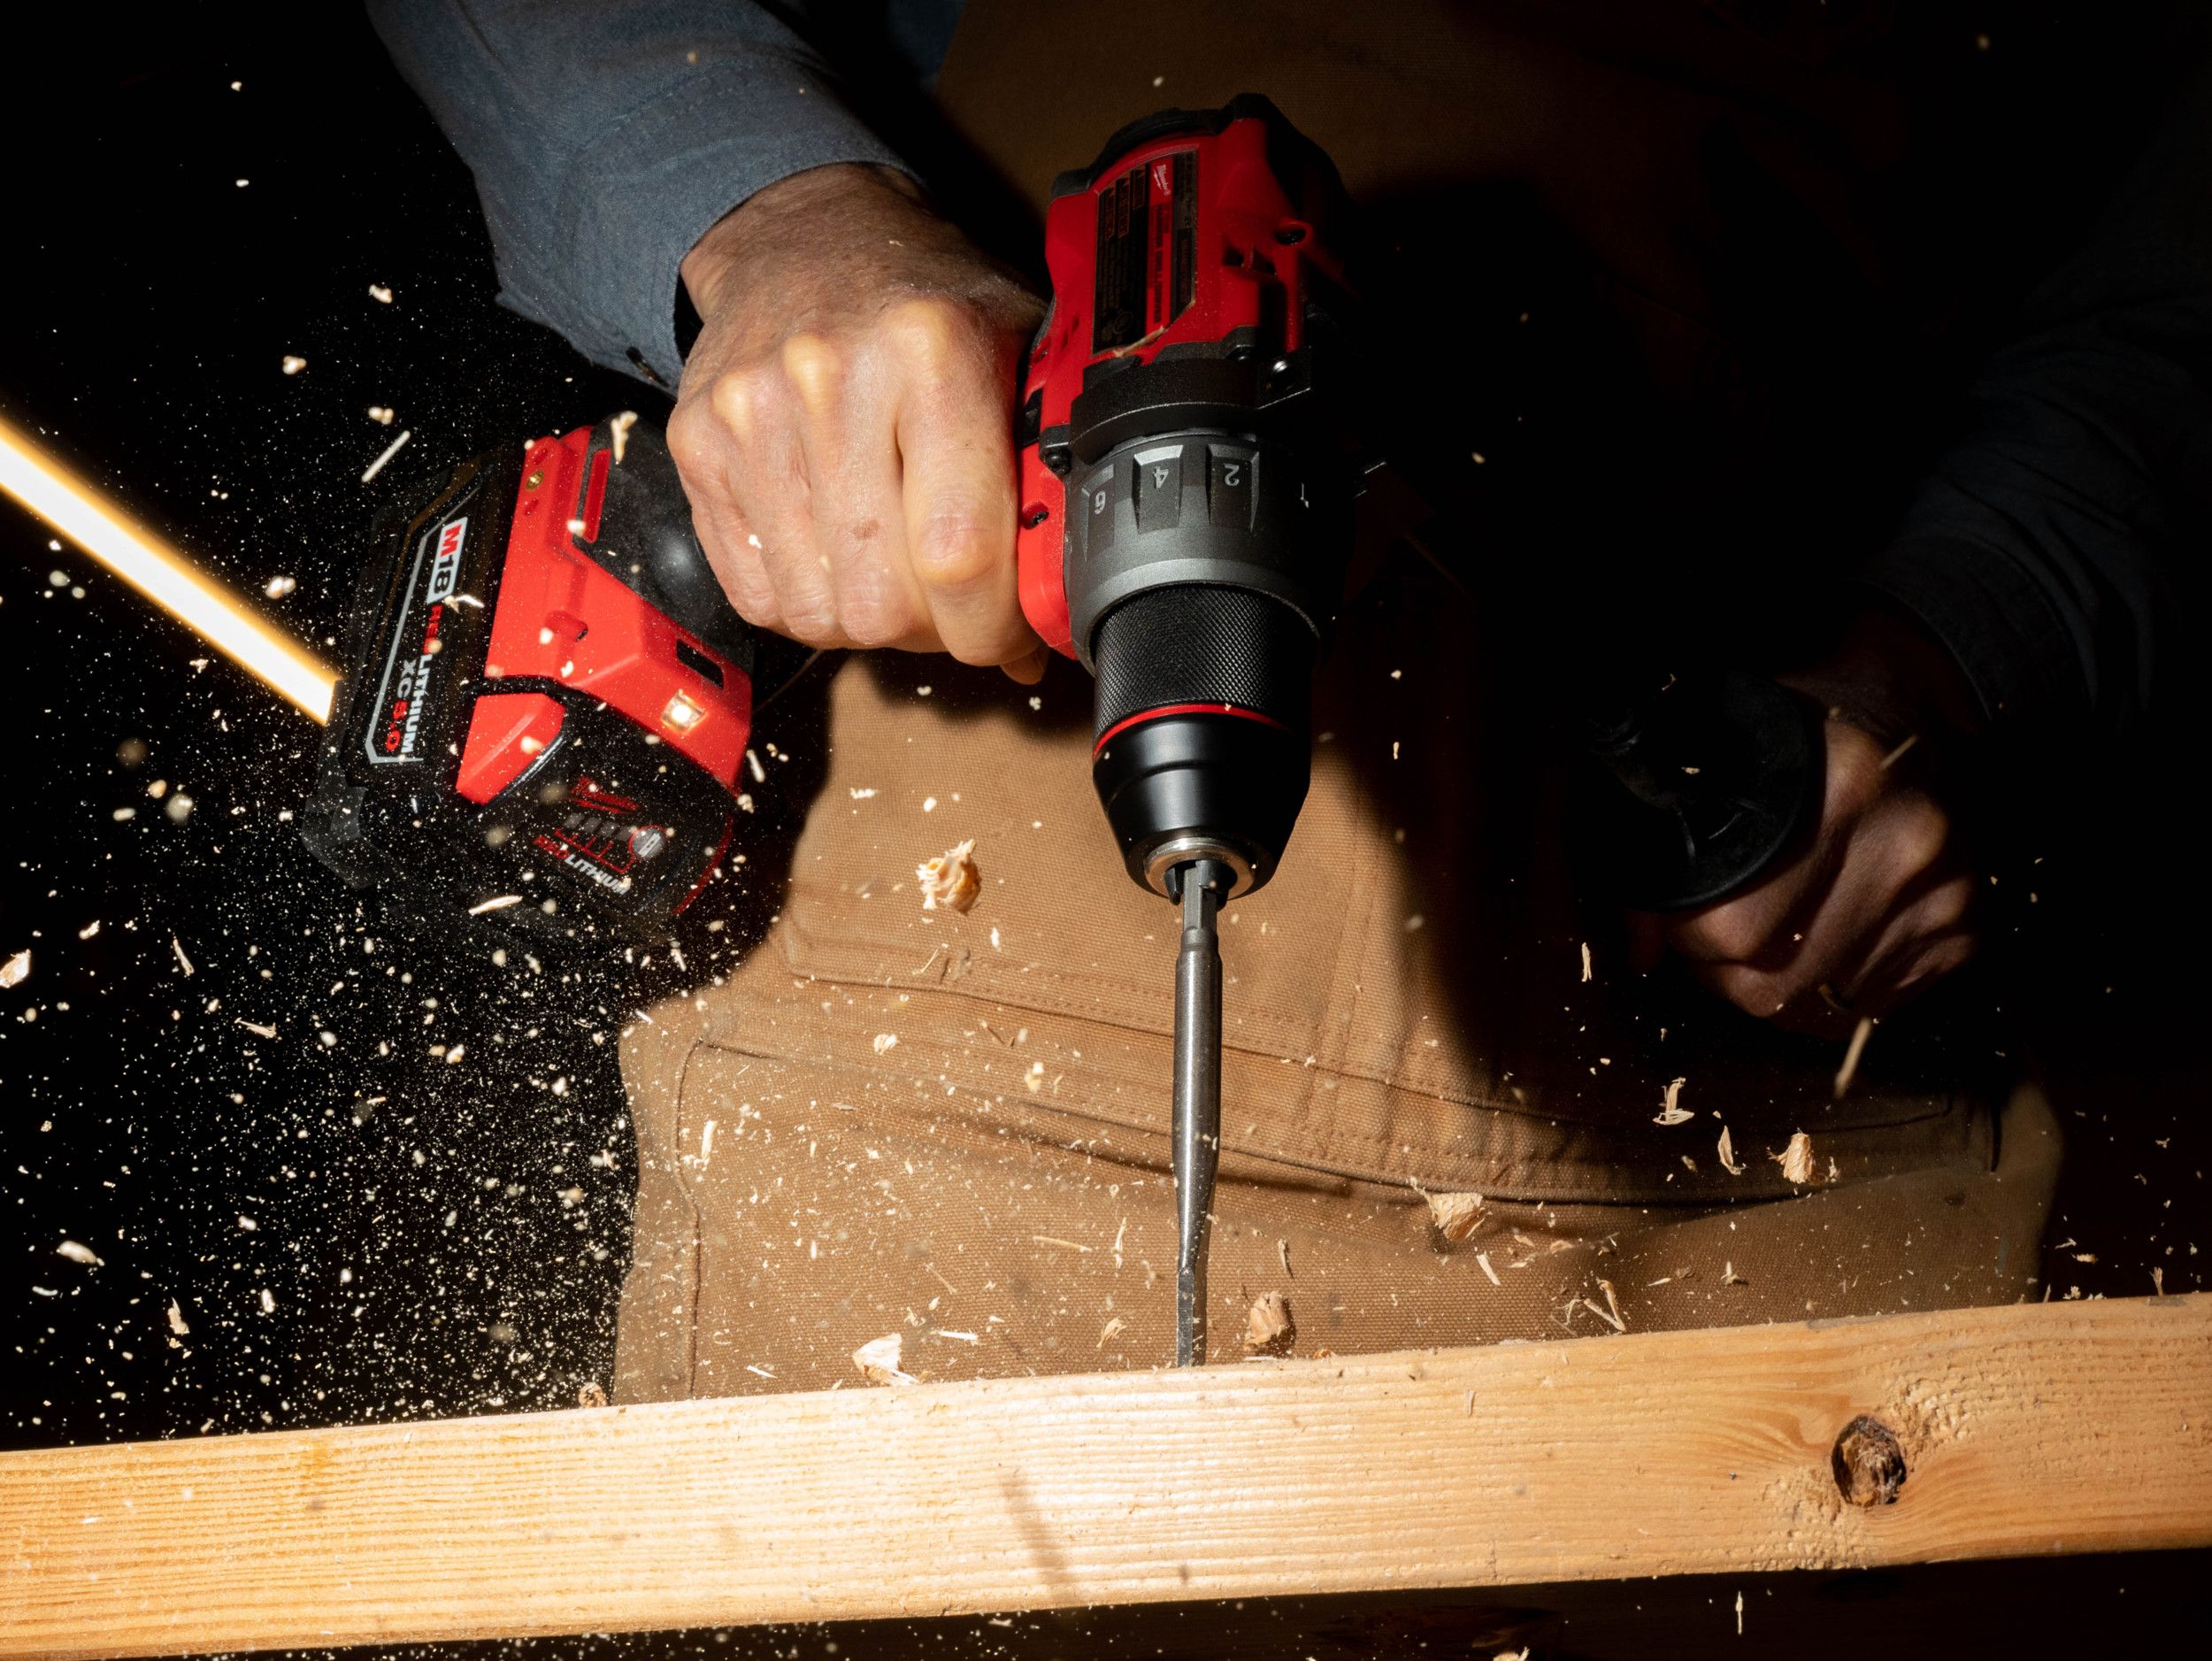 Best Cordless Power Tools for Construction Work